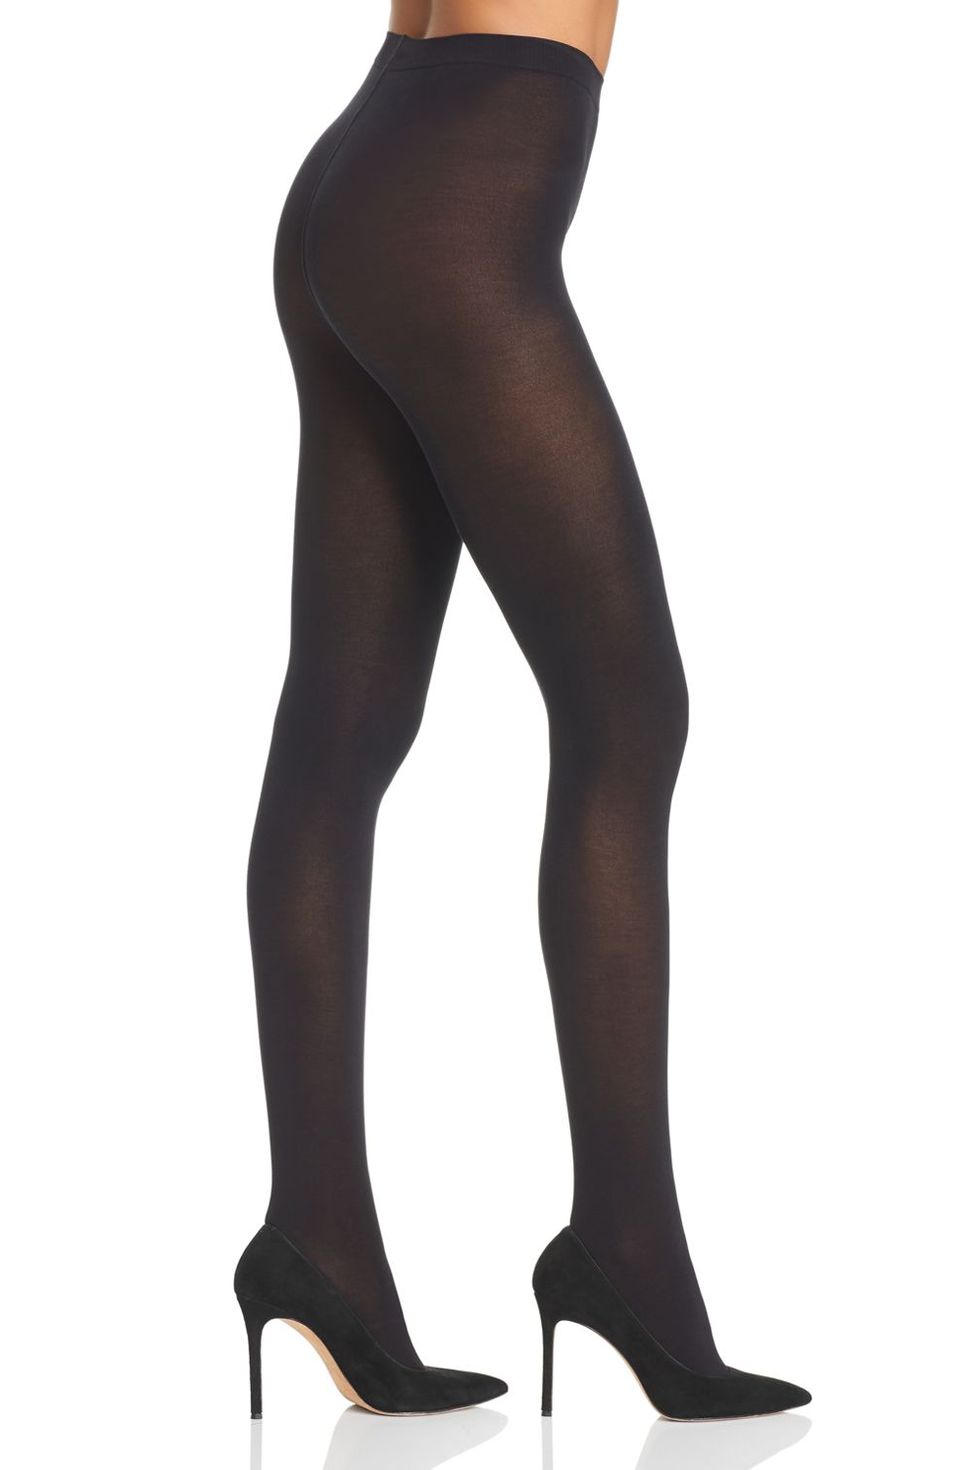 Wolford sheer tights comparison! Really love the look and feel